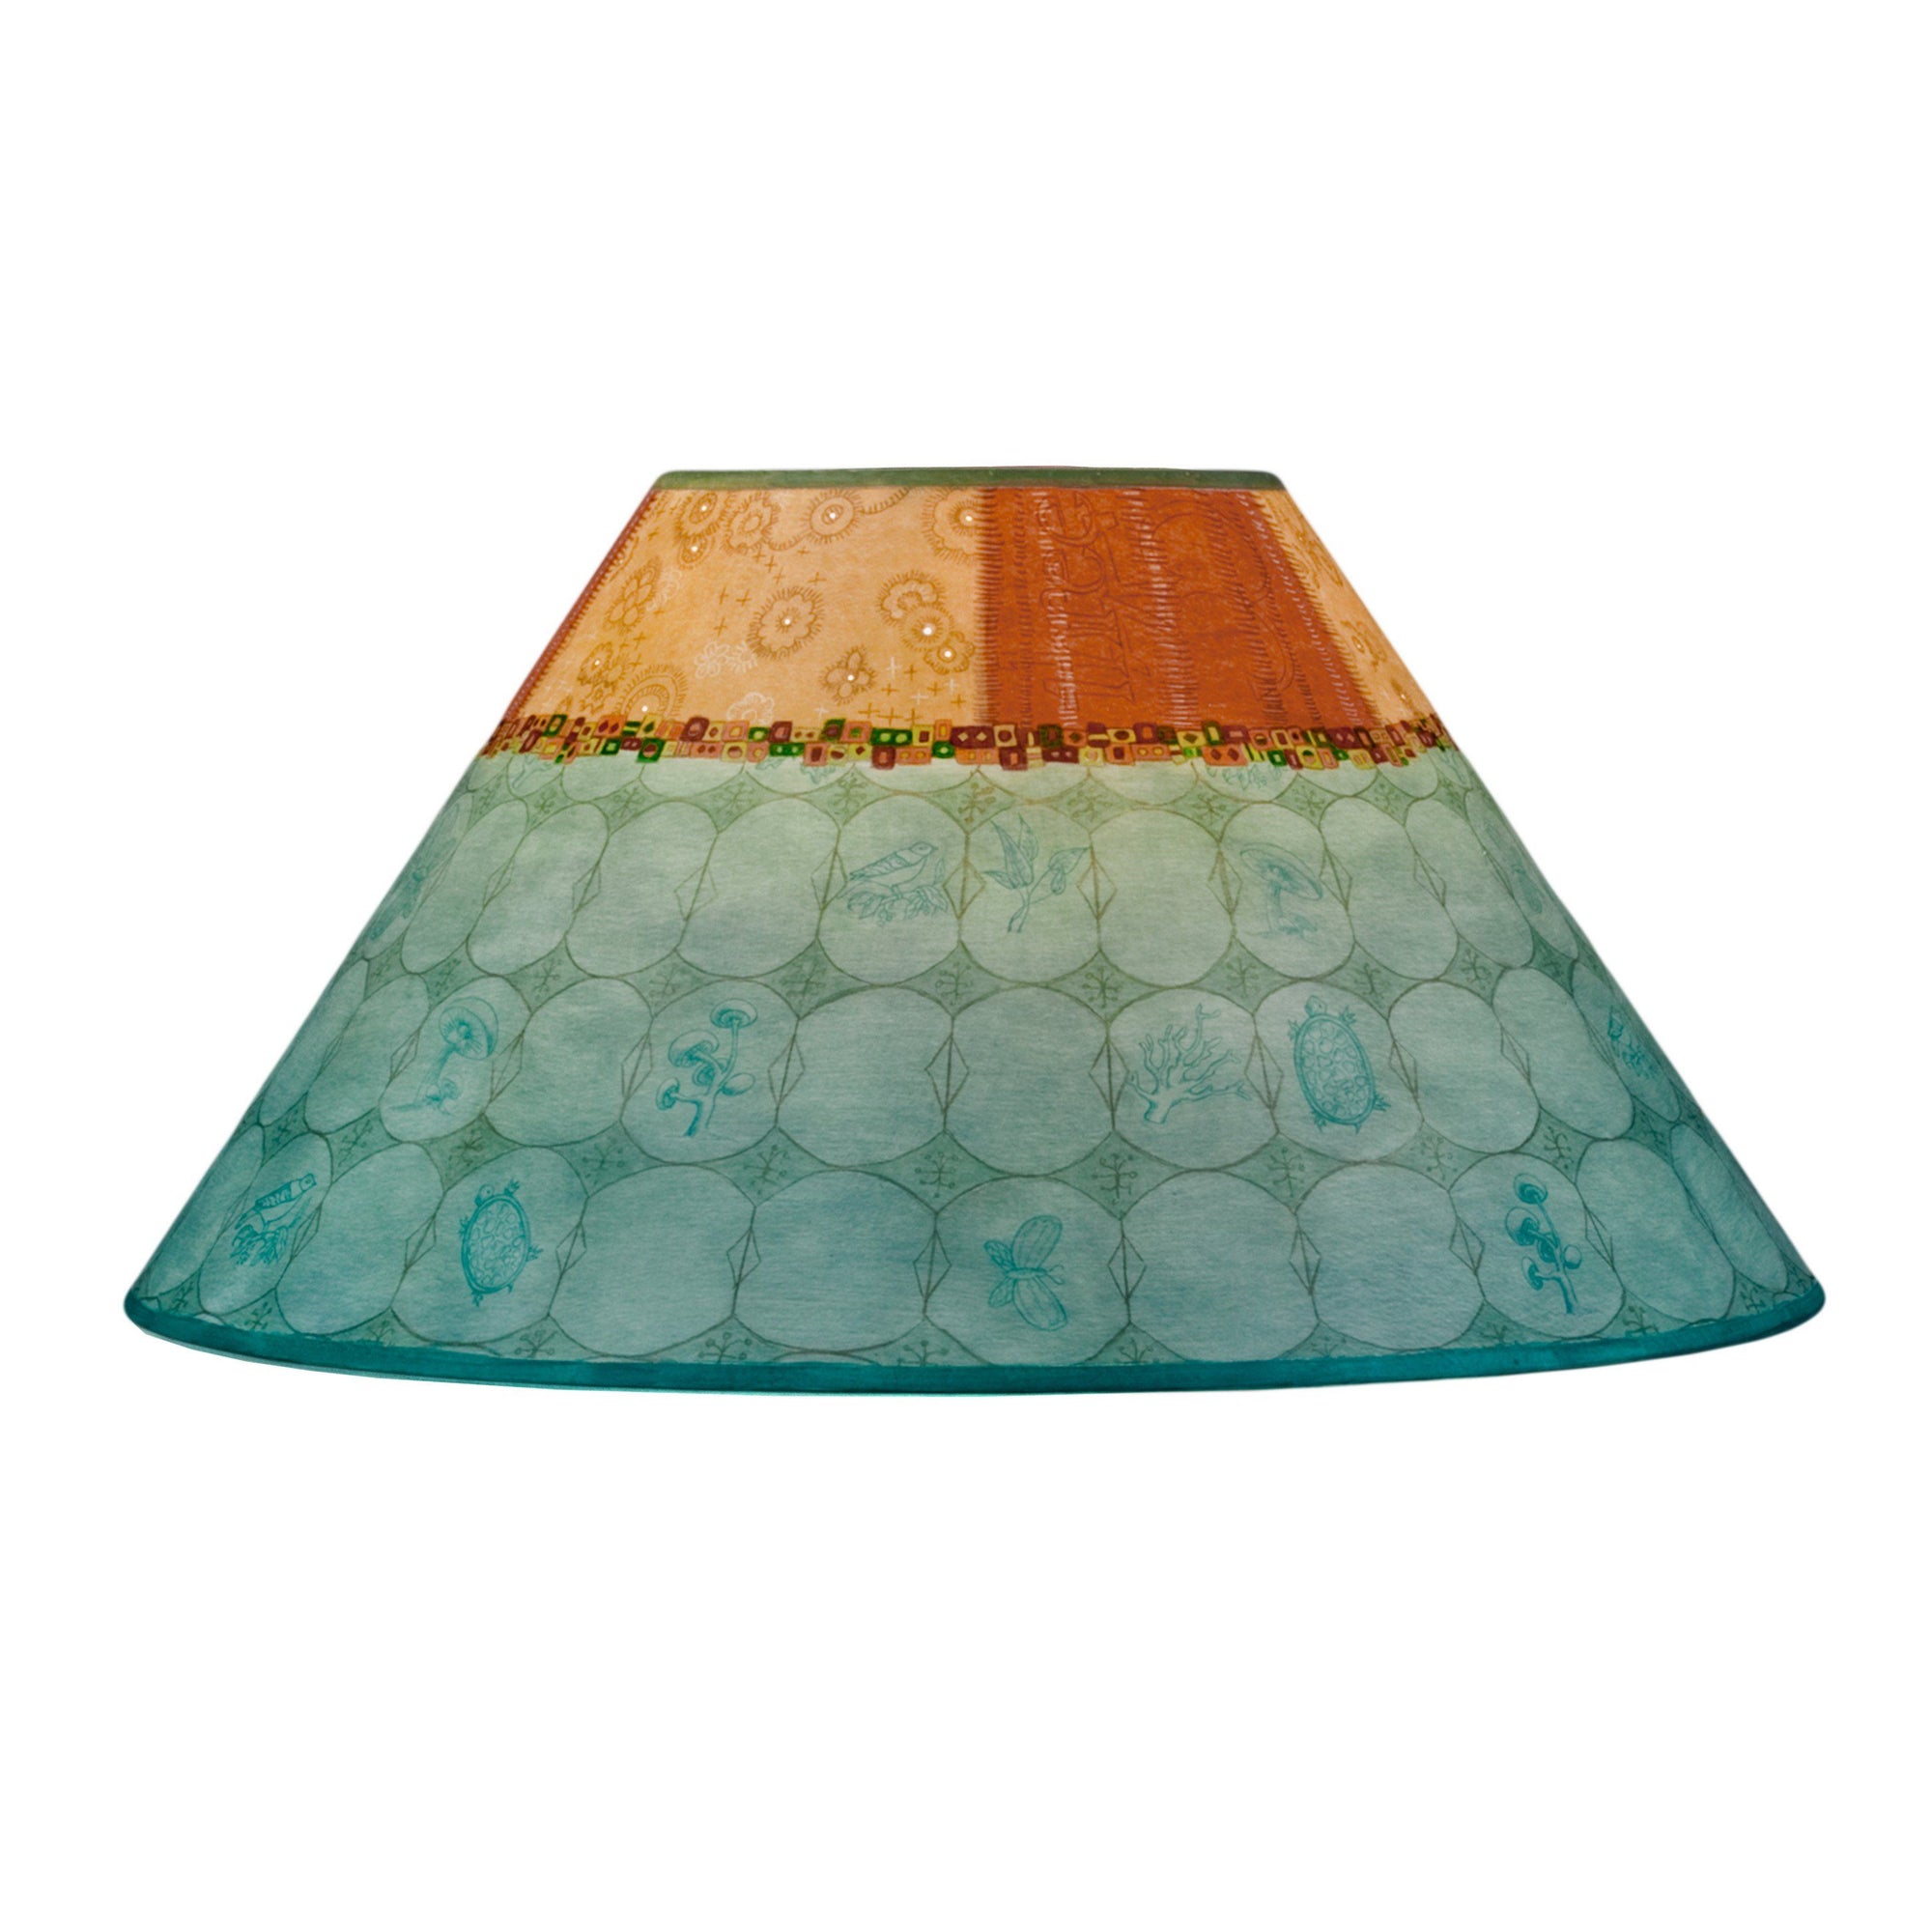 Janna Ugone & Co Lamp Shades Large Conical Lamp Shade in Paradise Pool